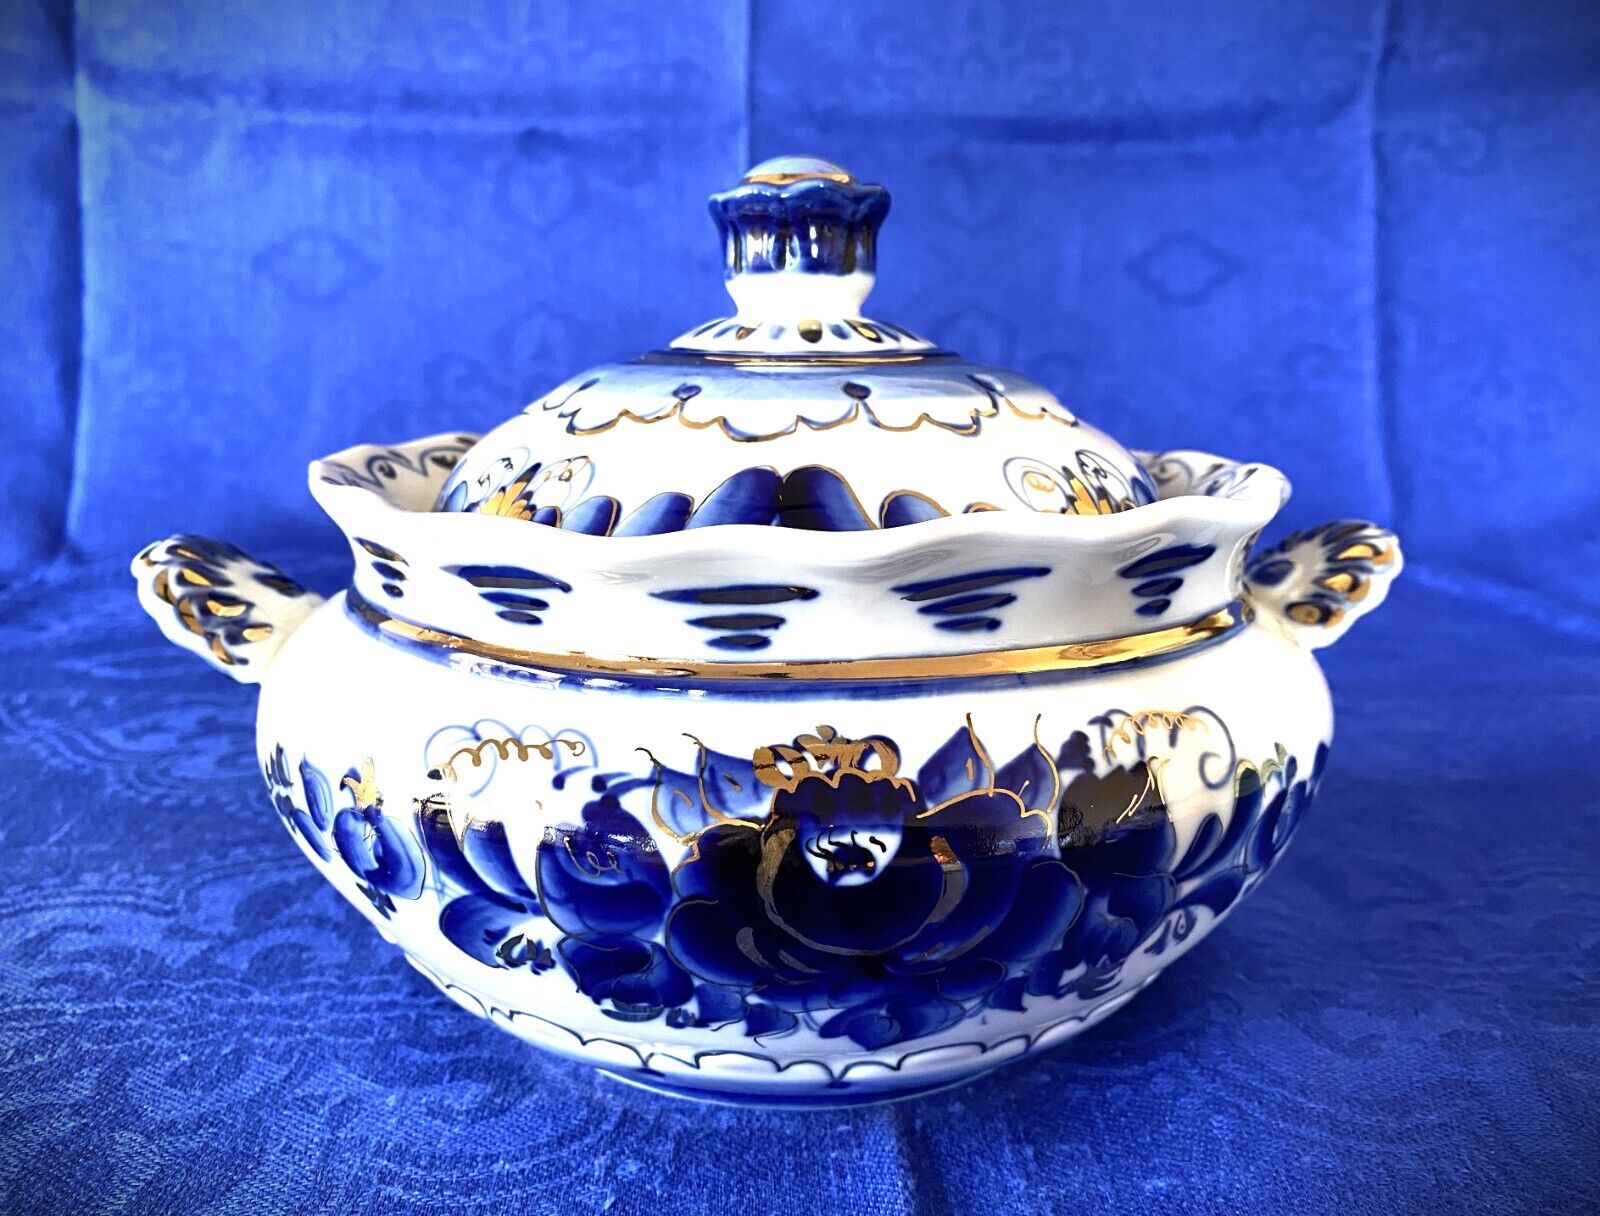 Gzhel Soup Pan with Lid, porcelain, handmade, 6x10x8 in